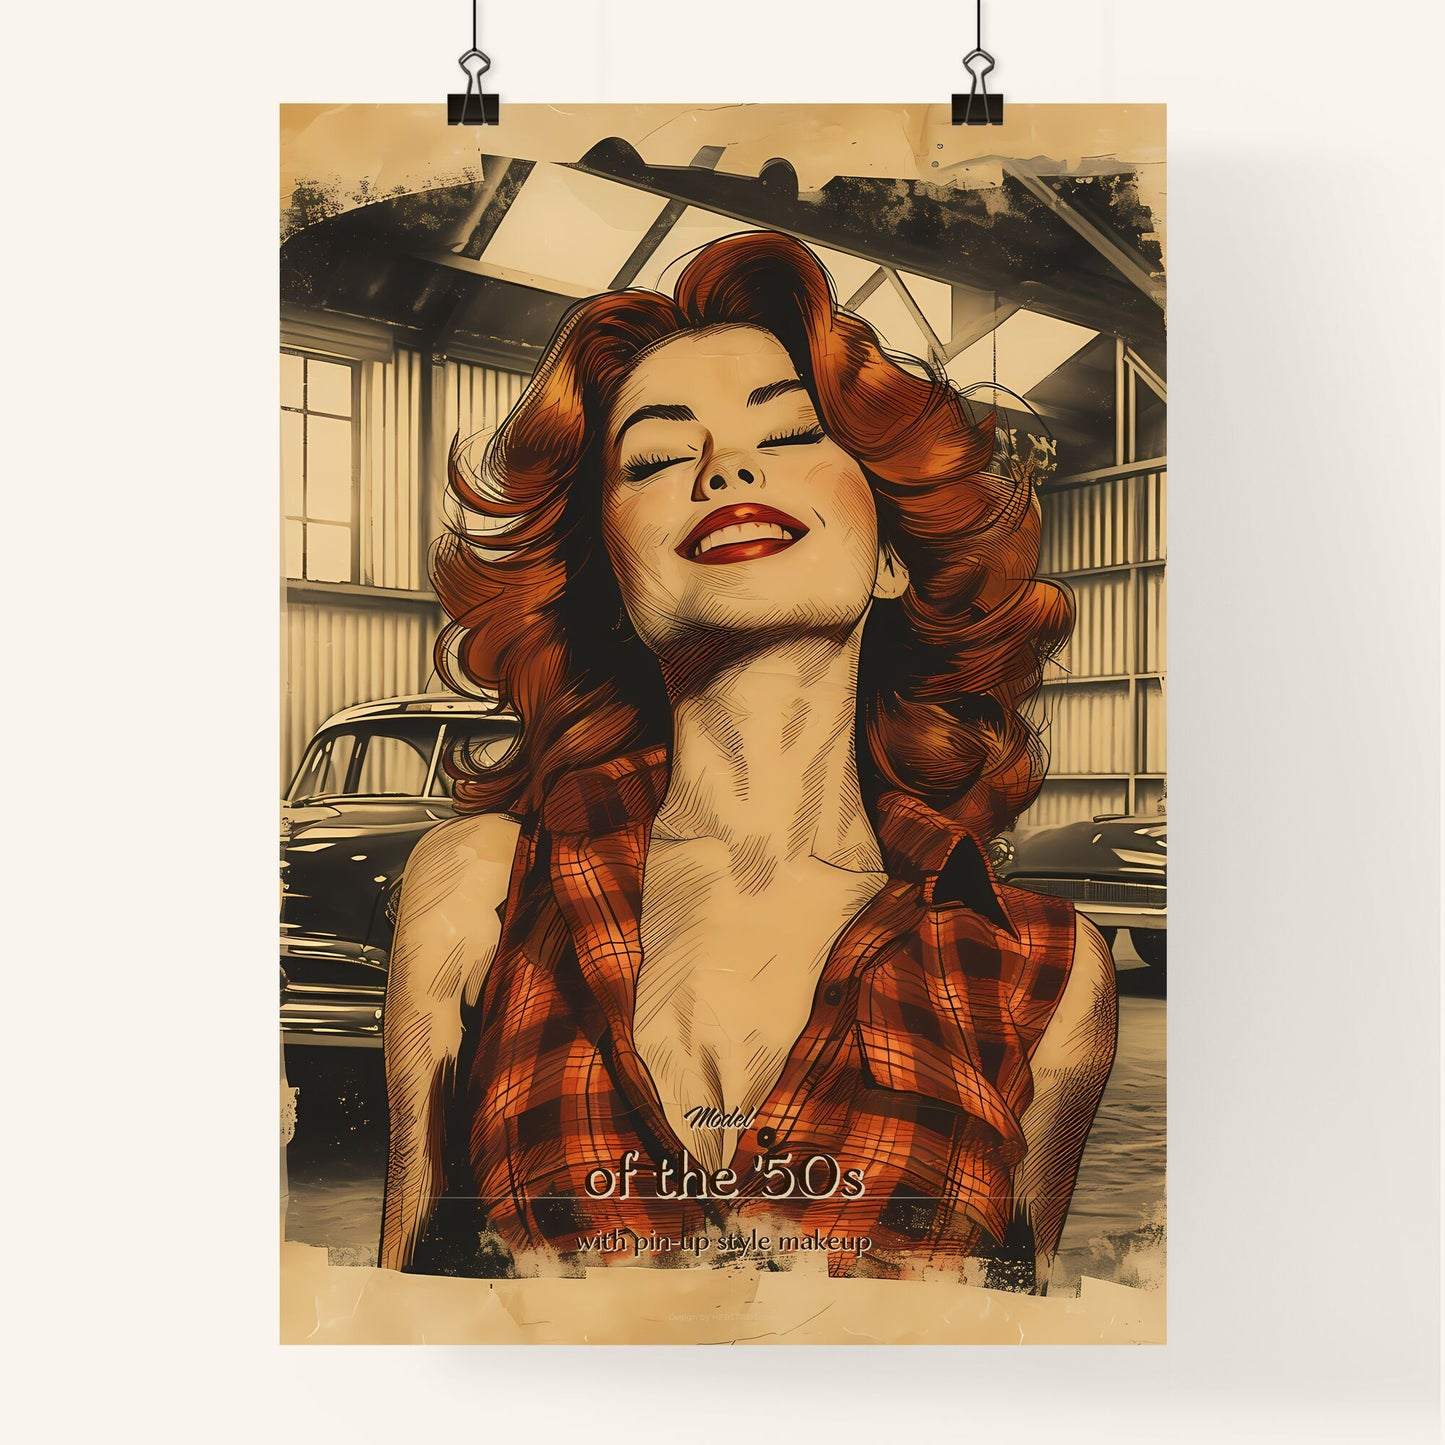 Model, of the '50s, with pin-up style makeup, A Poster of a woman with red hair and red lips Default Title